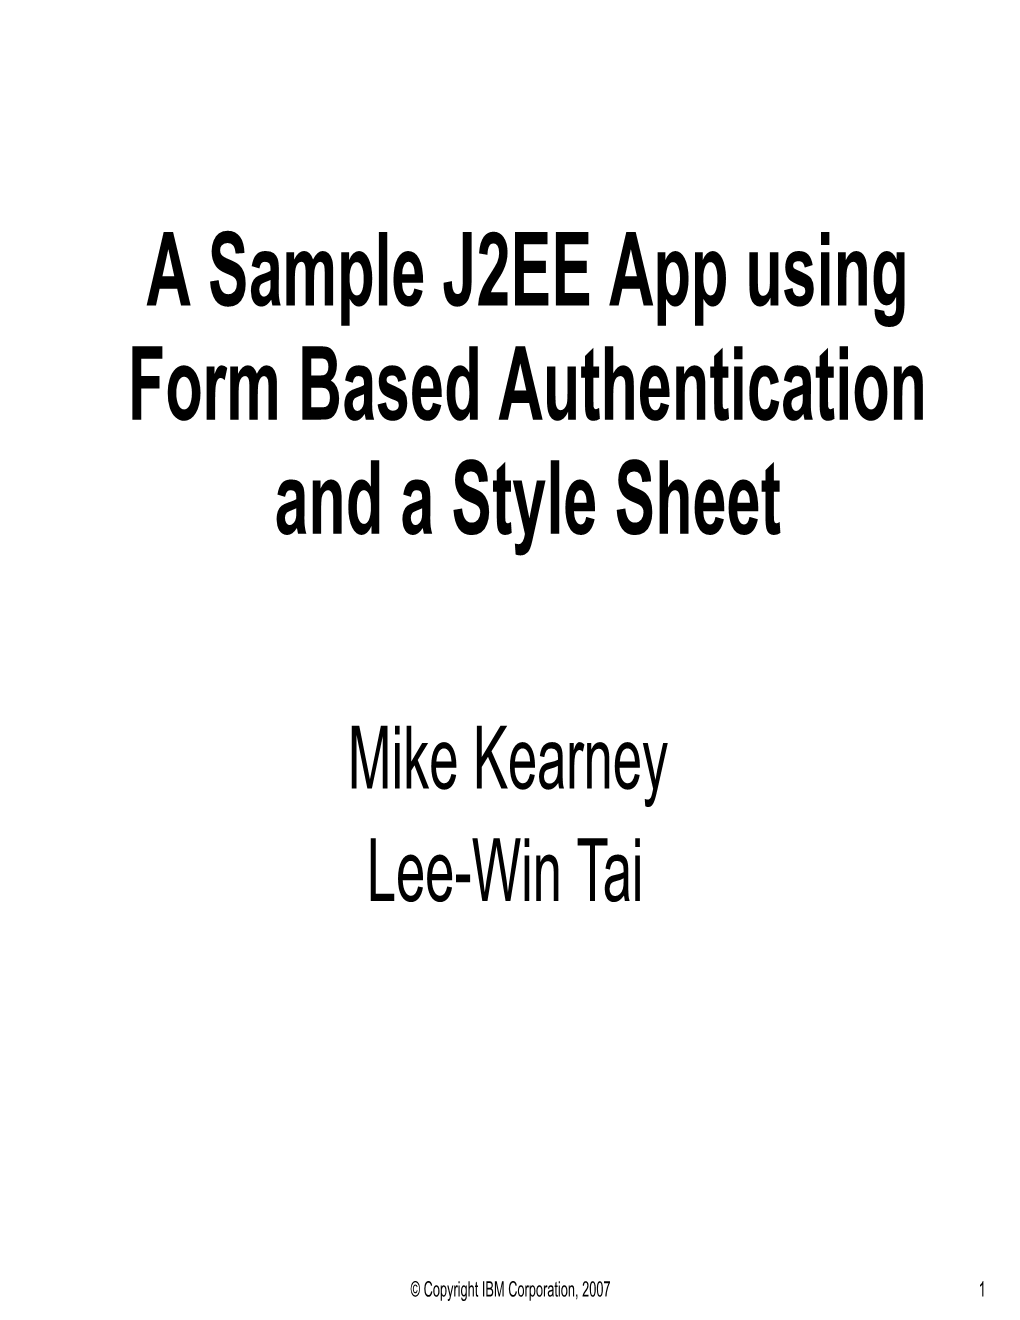 A Sample J2EE App Using Form Based Autentication and a Style Sheet.PRZ